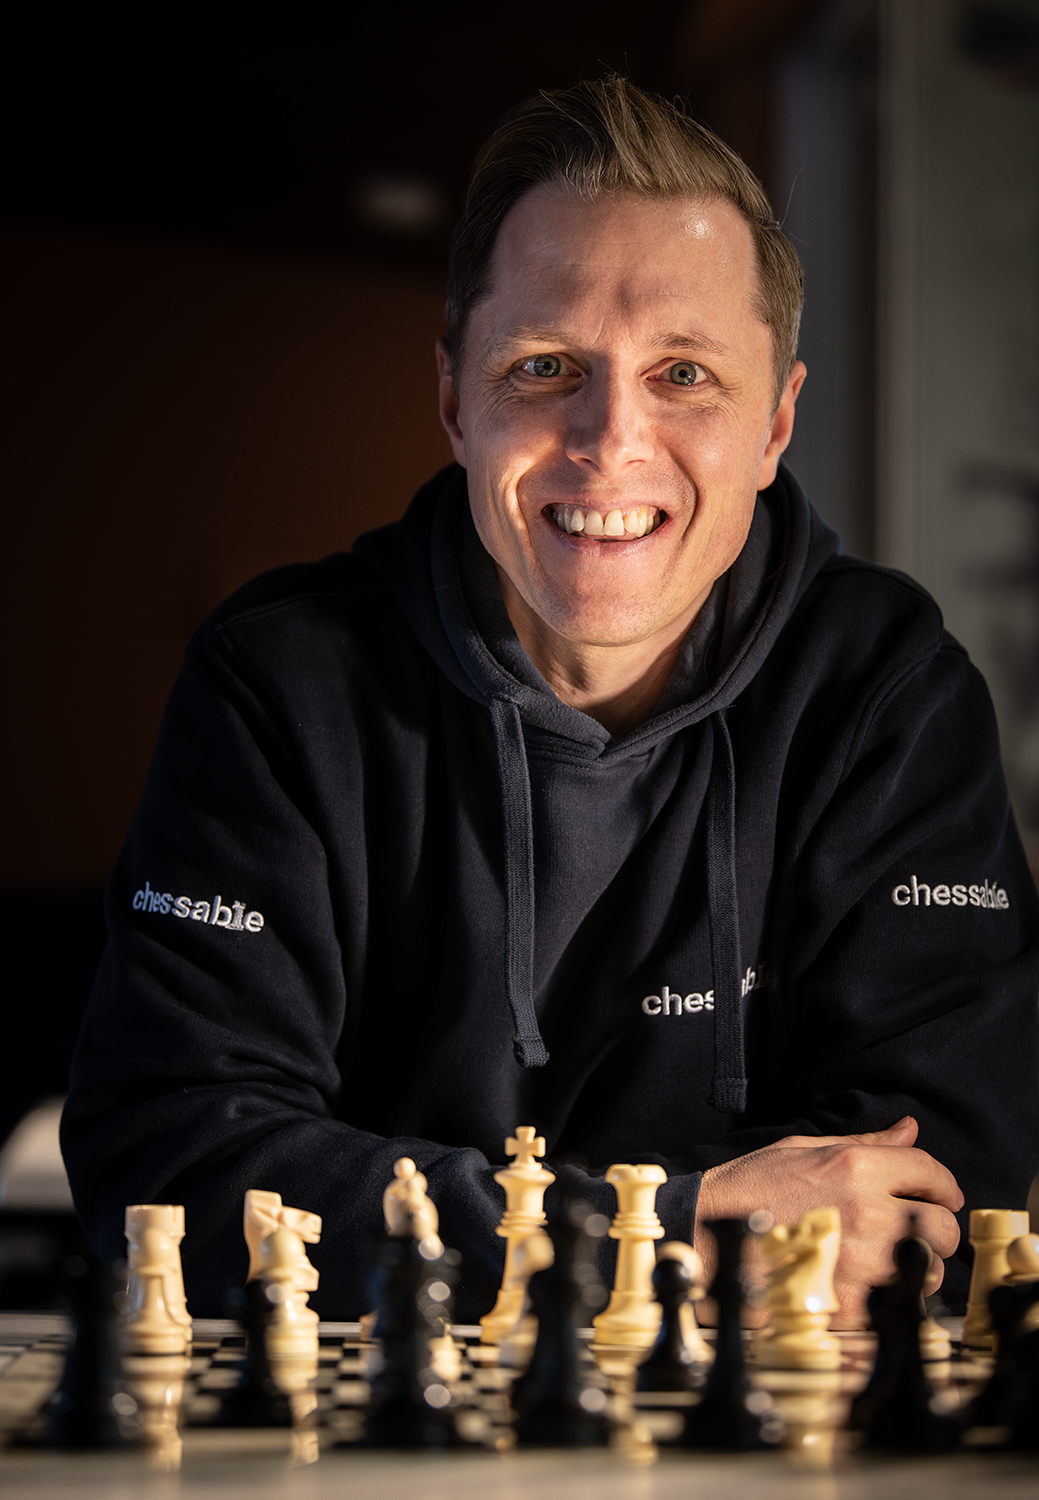 Chess Openings Online - Chessable